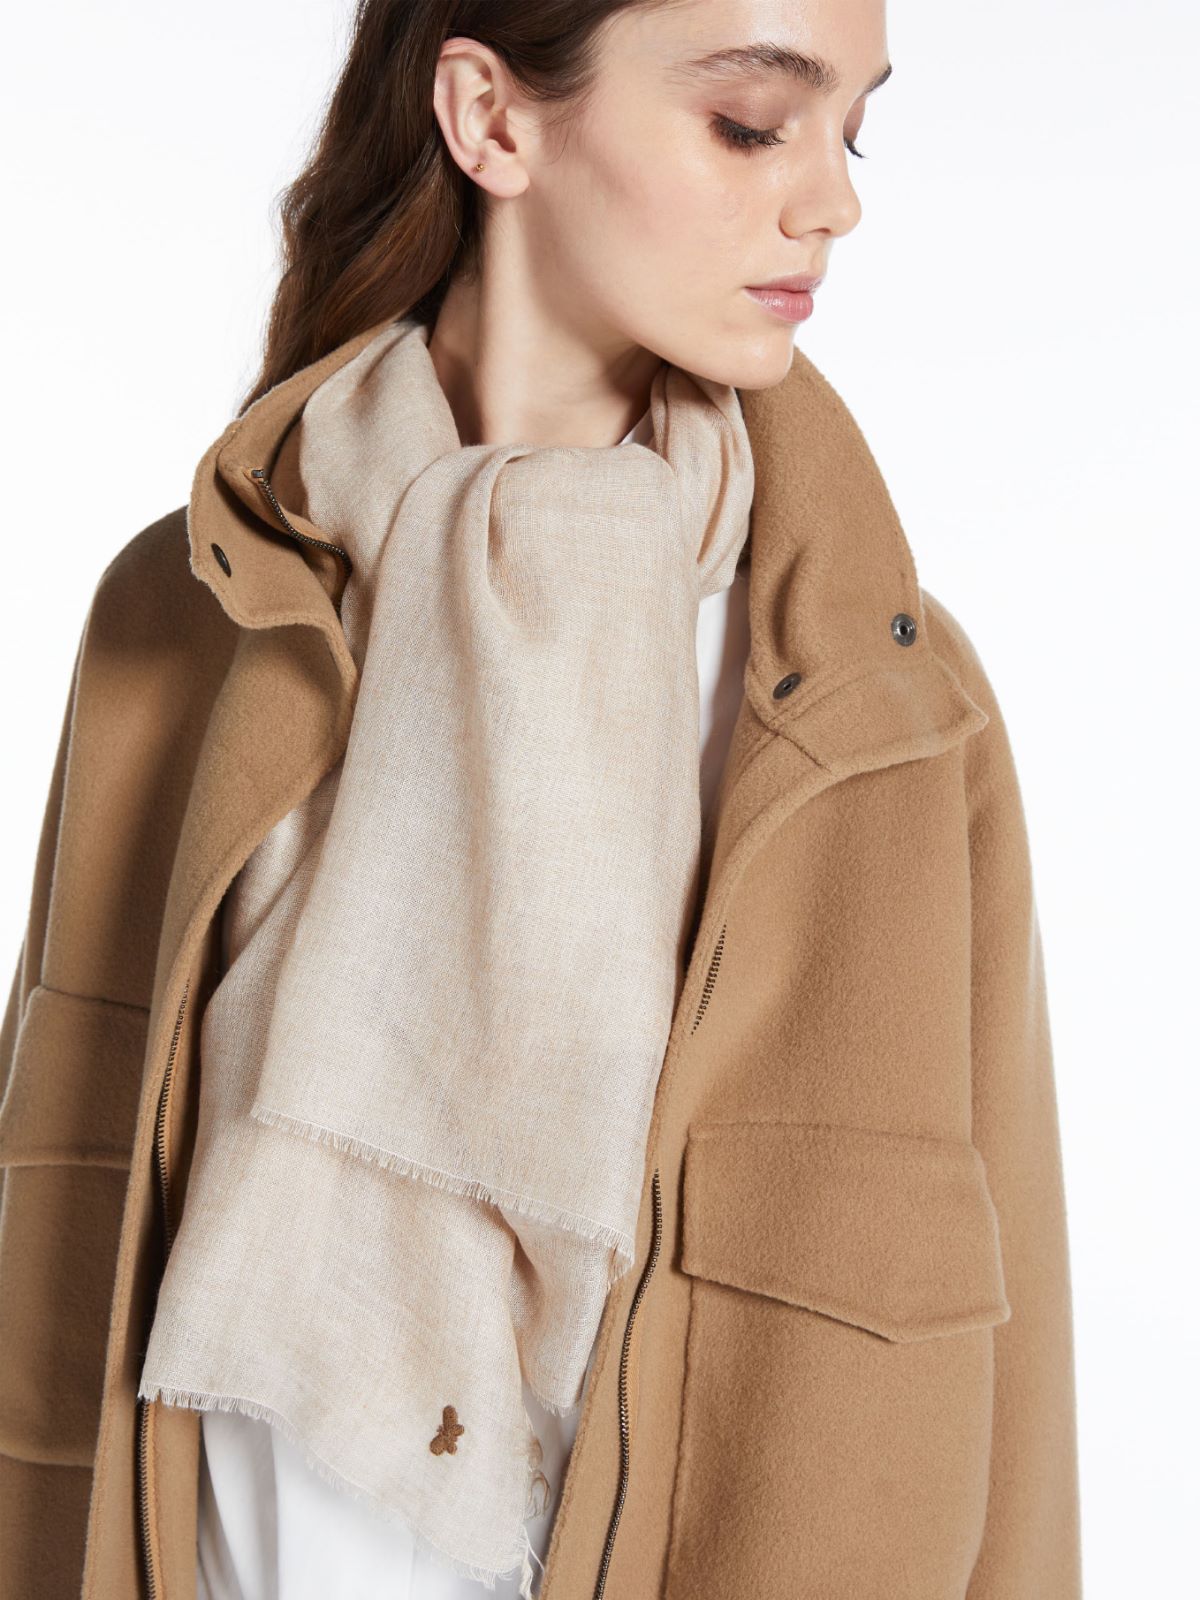 Viscose and cashmere stole - CAMEL - Weekend Max Mara - 4